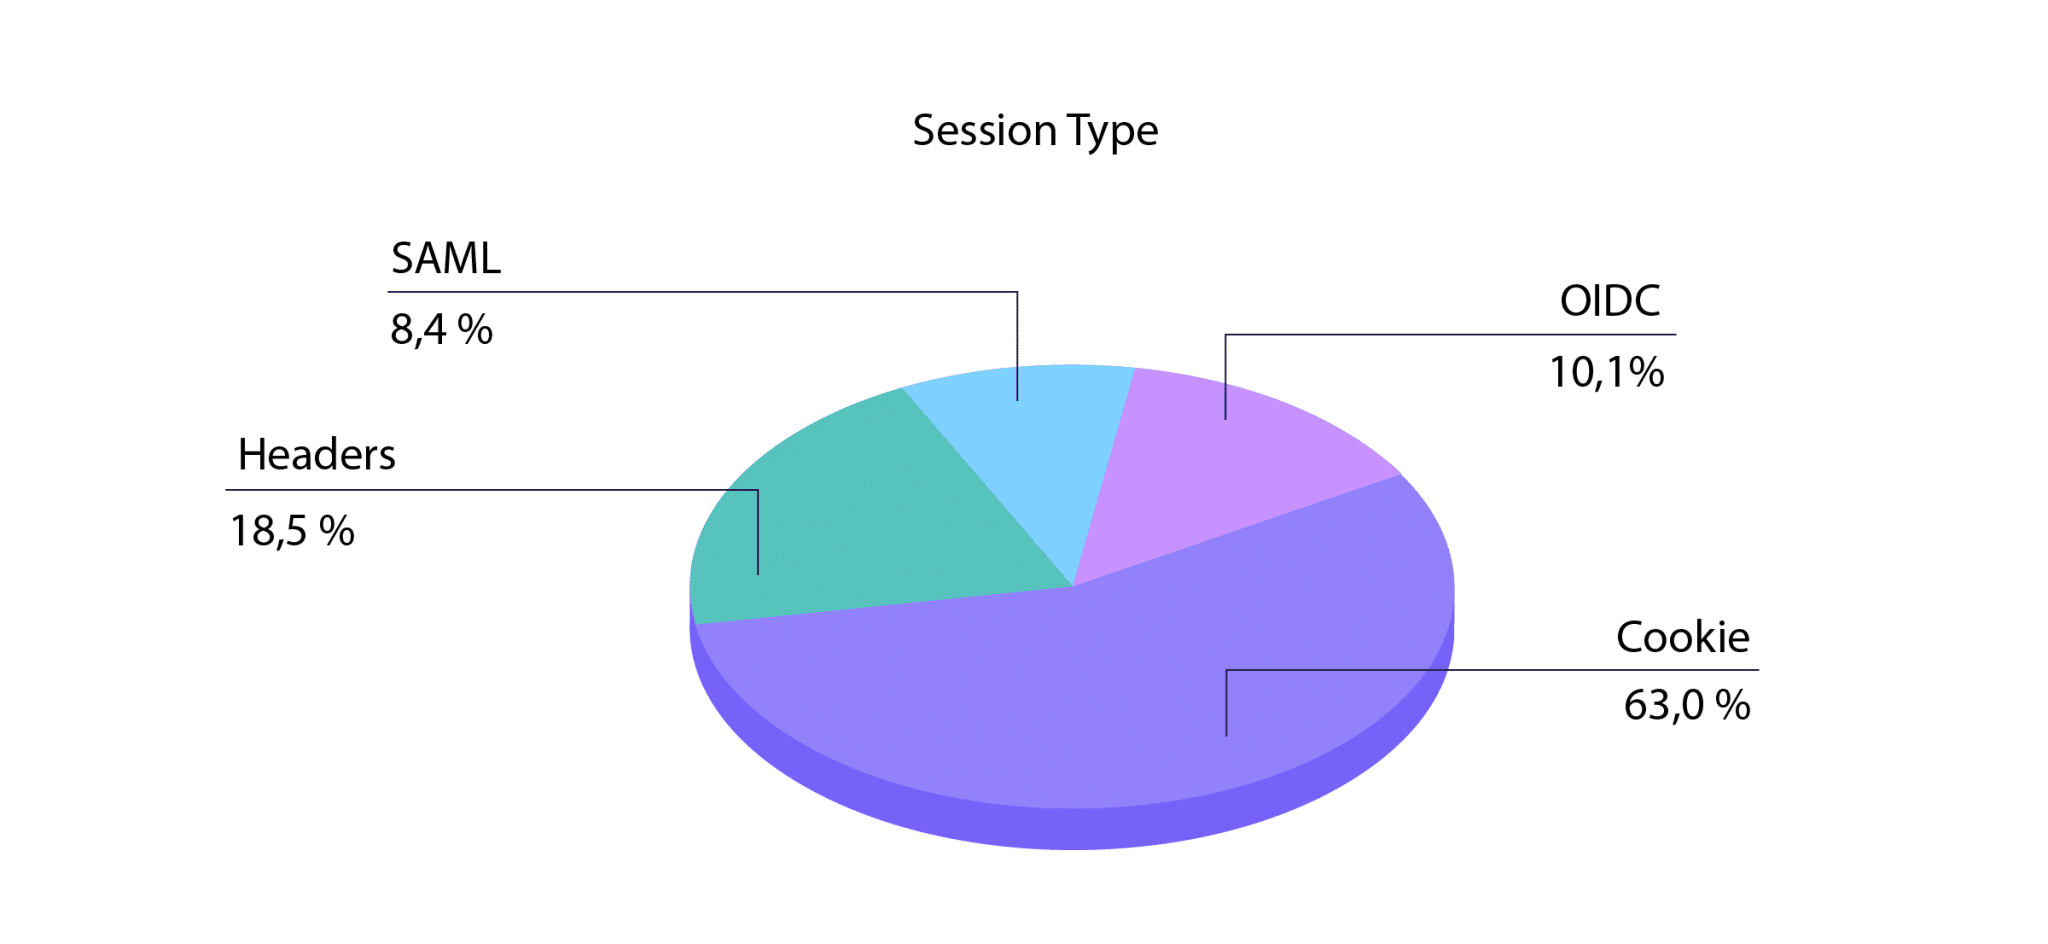 most popular session types